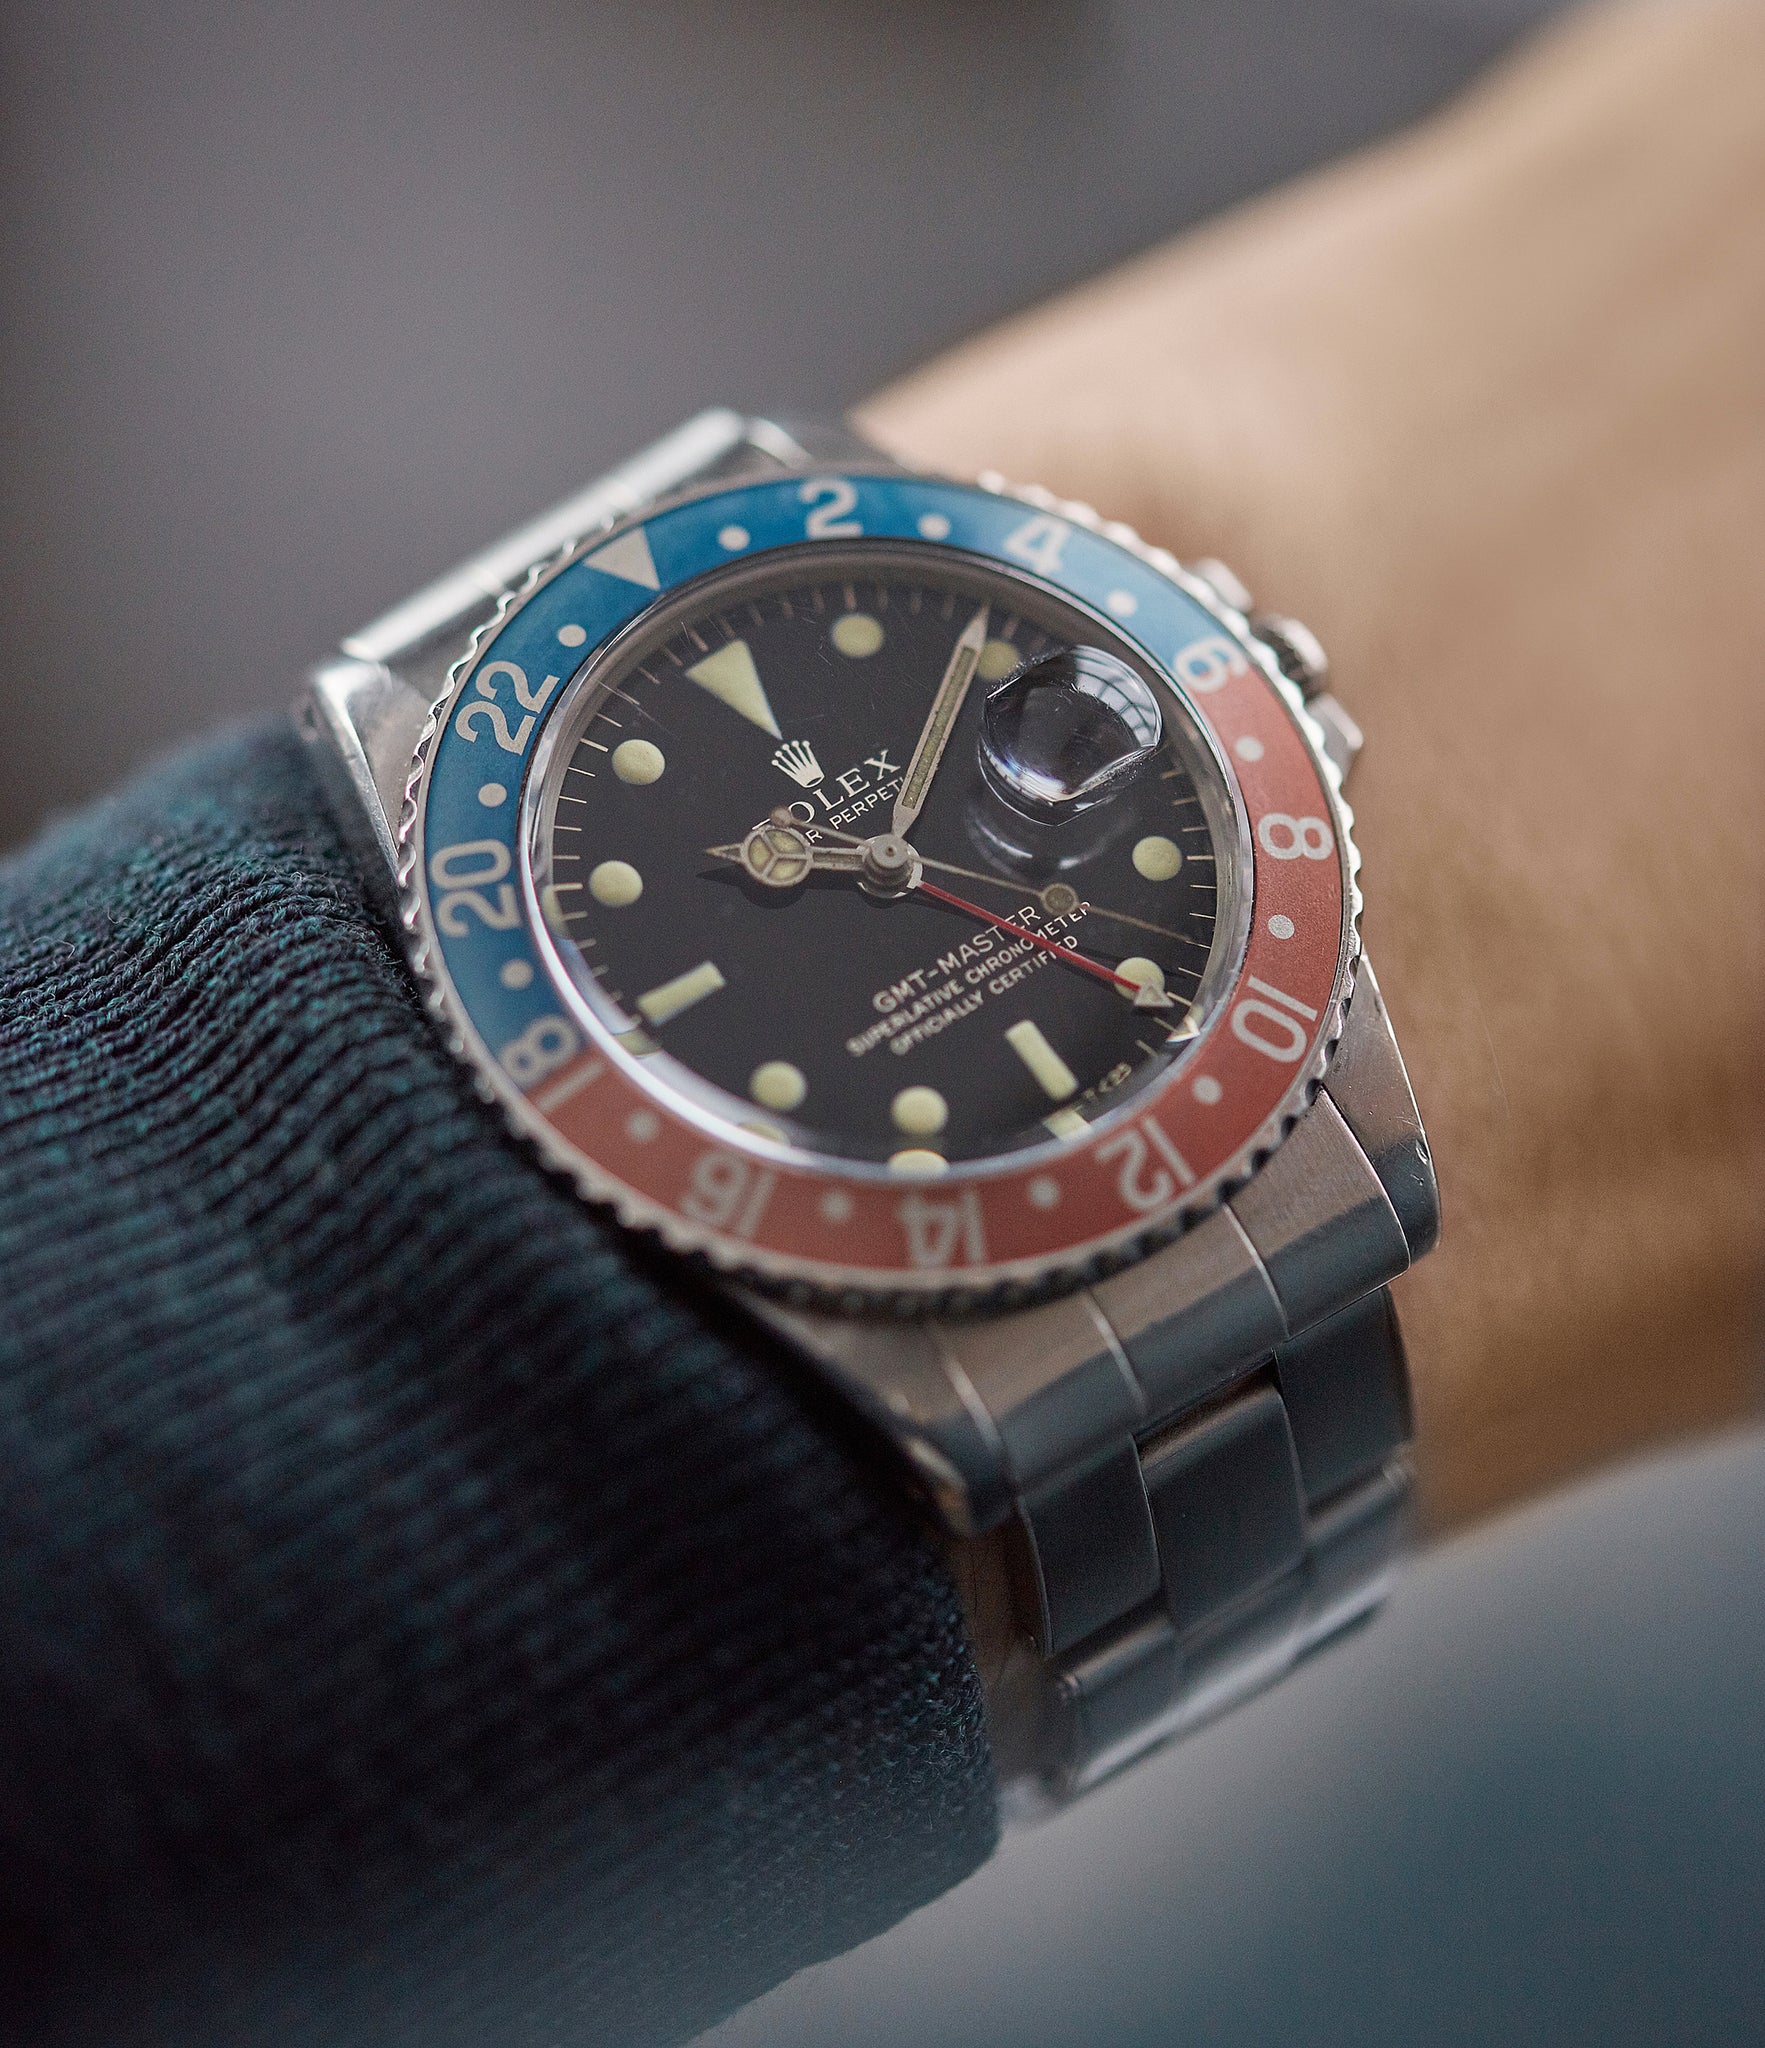 on the wrist vintage Rolex GMT-Master 1675 Gilt dial full set sports watch for sale online at A Collected Man London UK specialist of rare watches